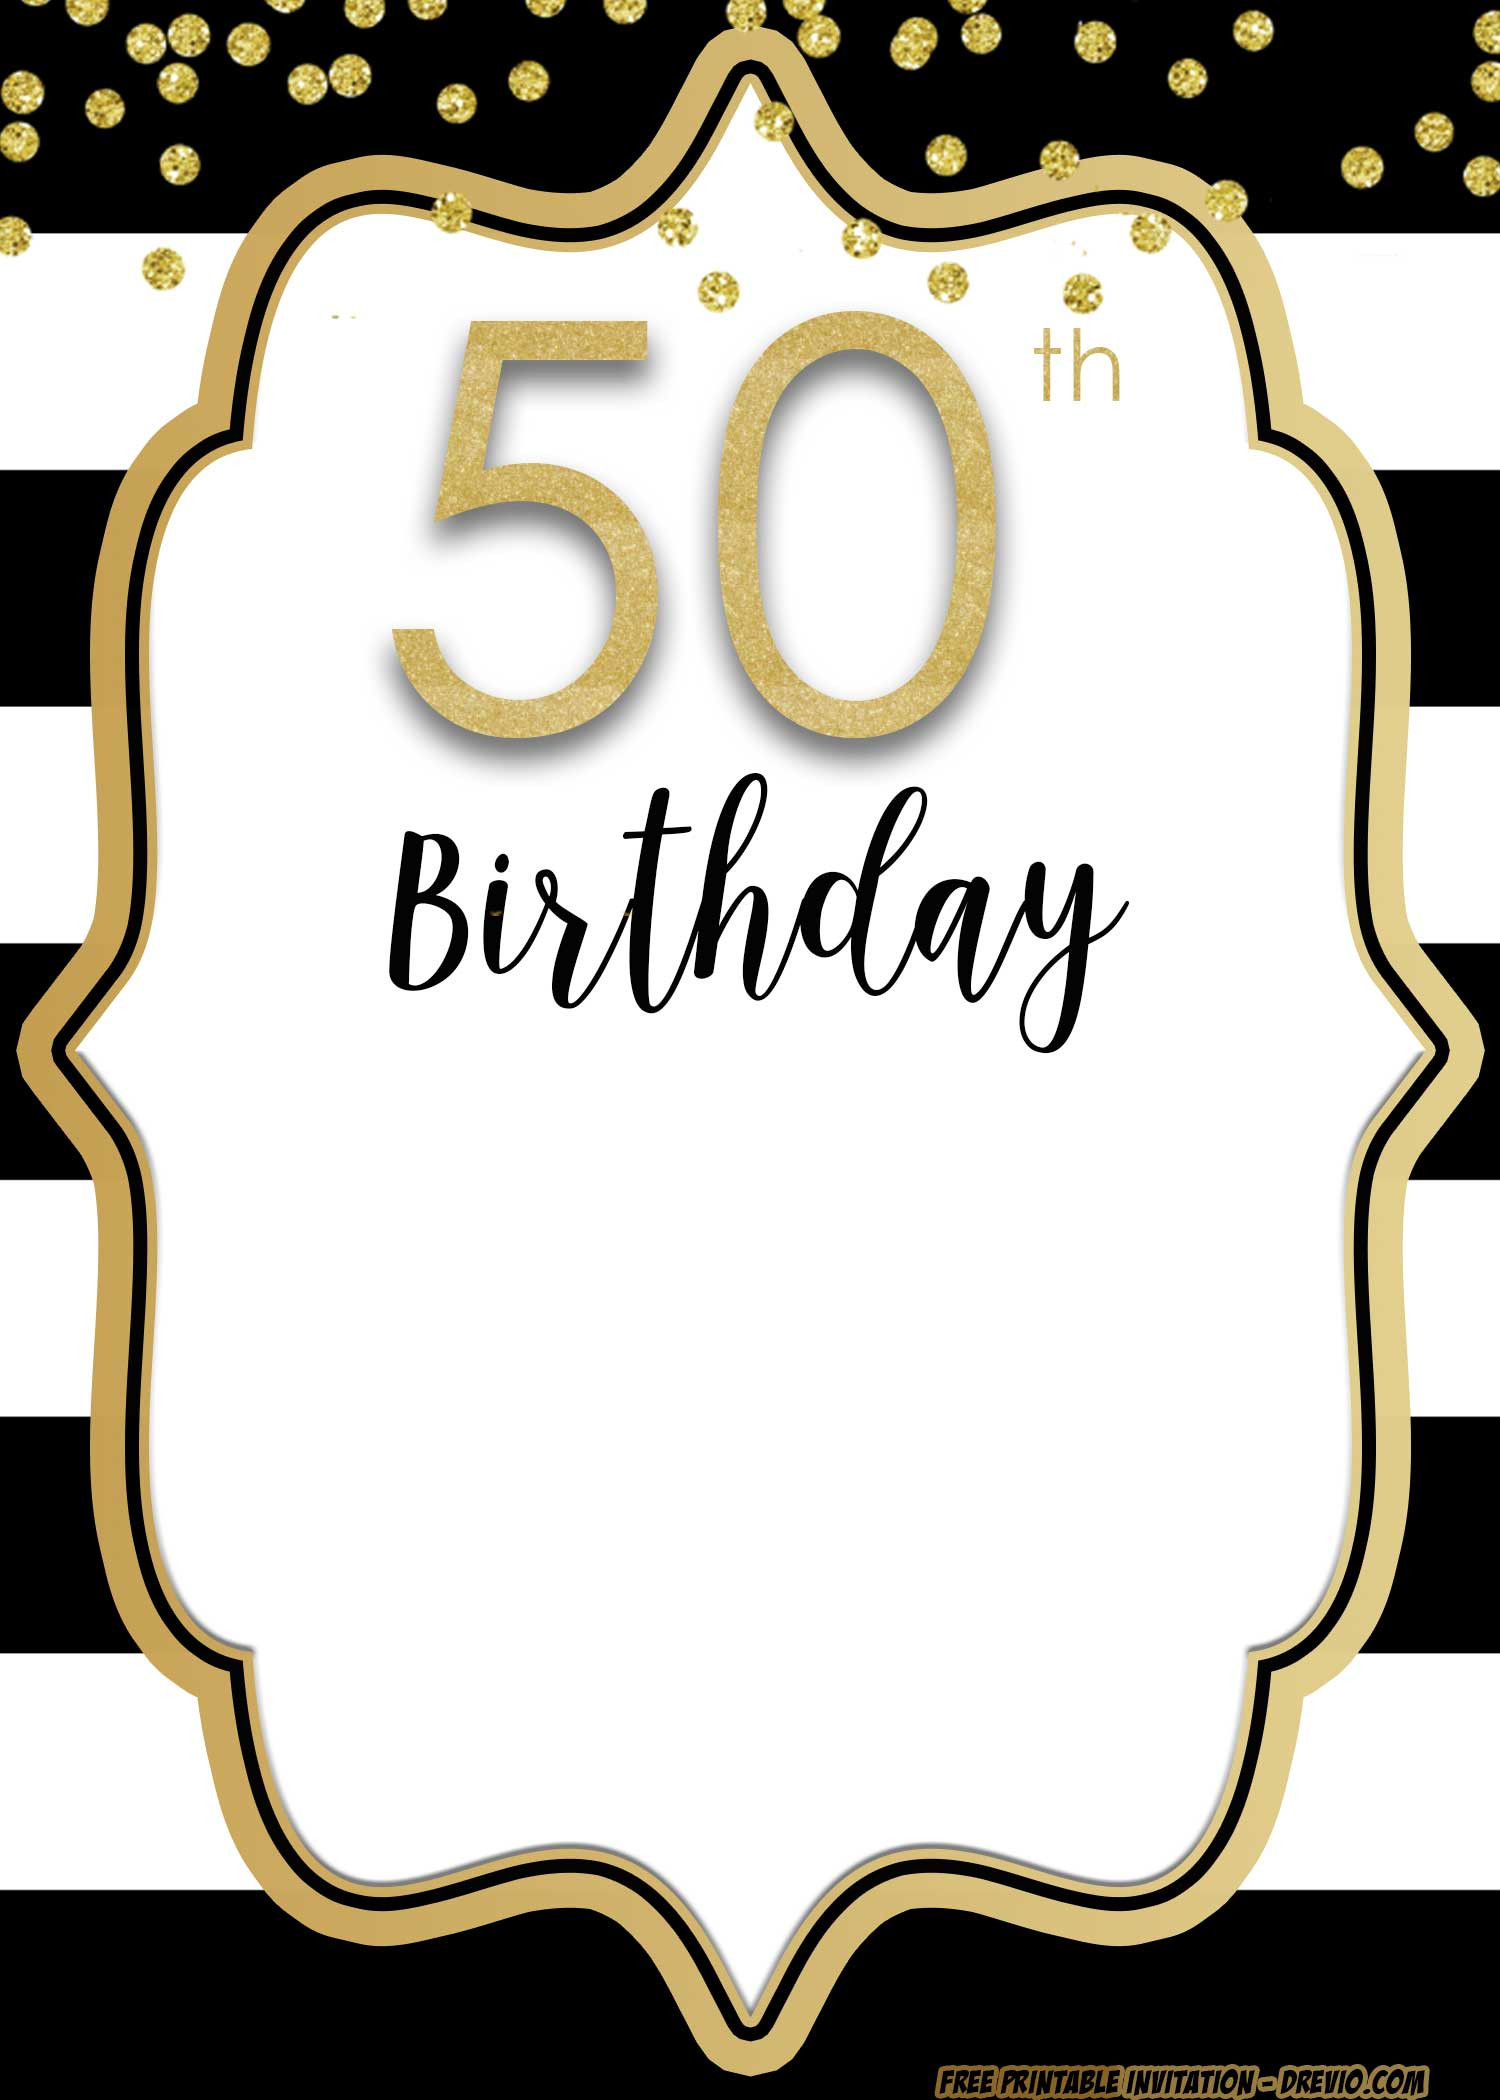 50th Birthday Invitation Template
 Adult Birthday Invitations Template for 50th years old